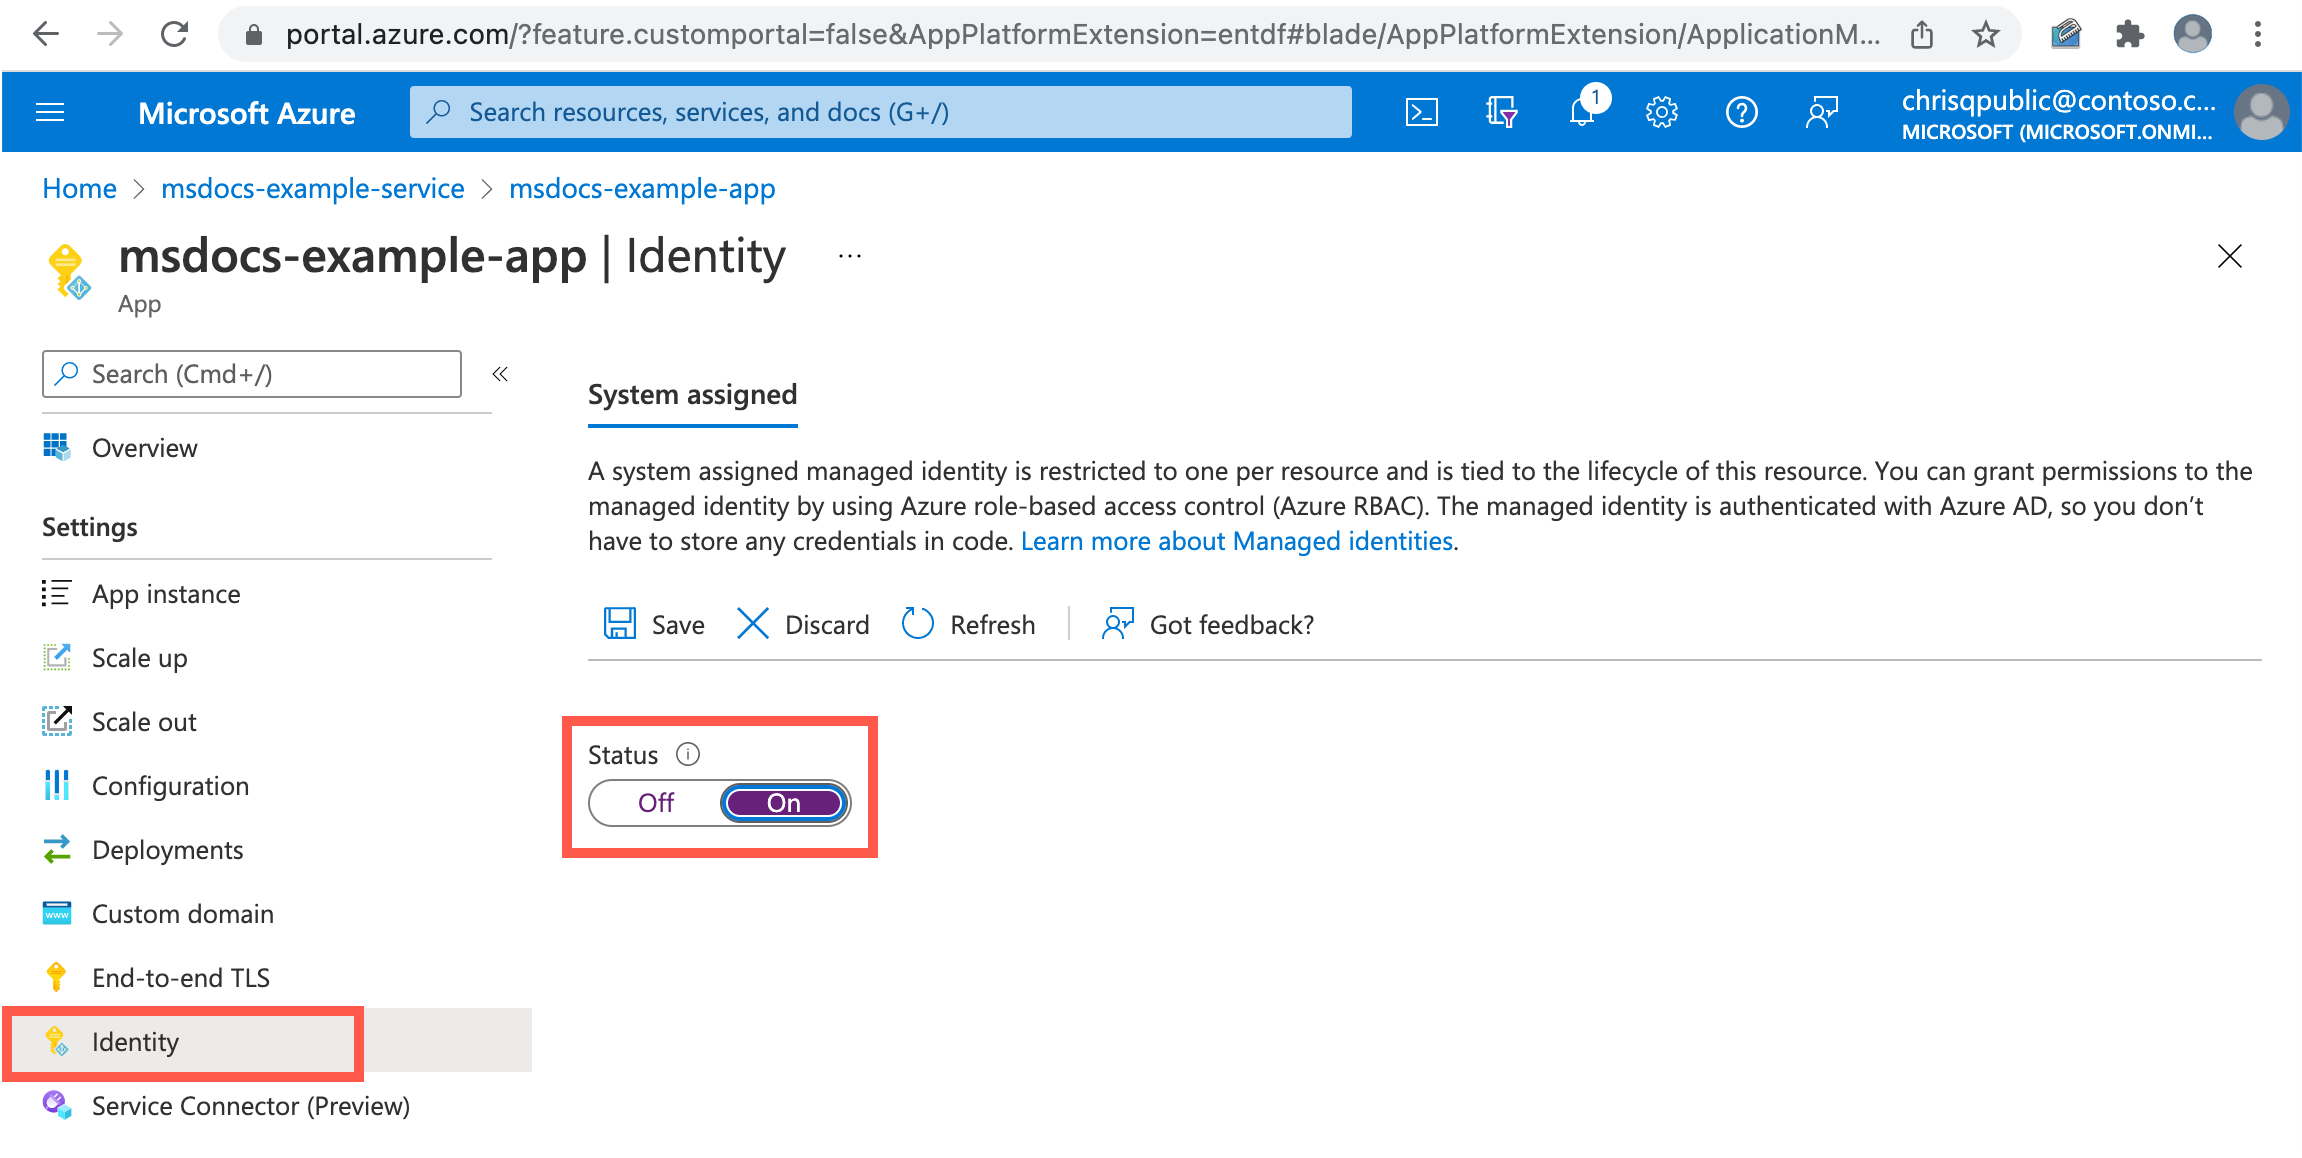 Screenshot of Azure portal showing the Identity screen for an application.